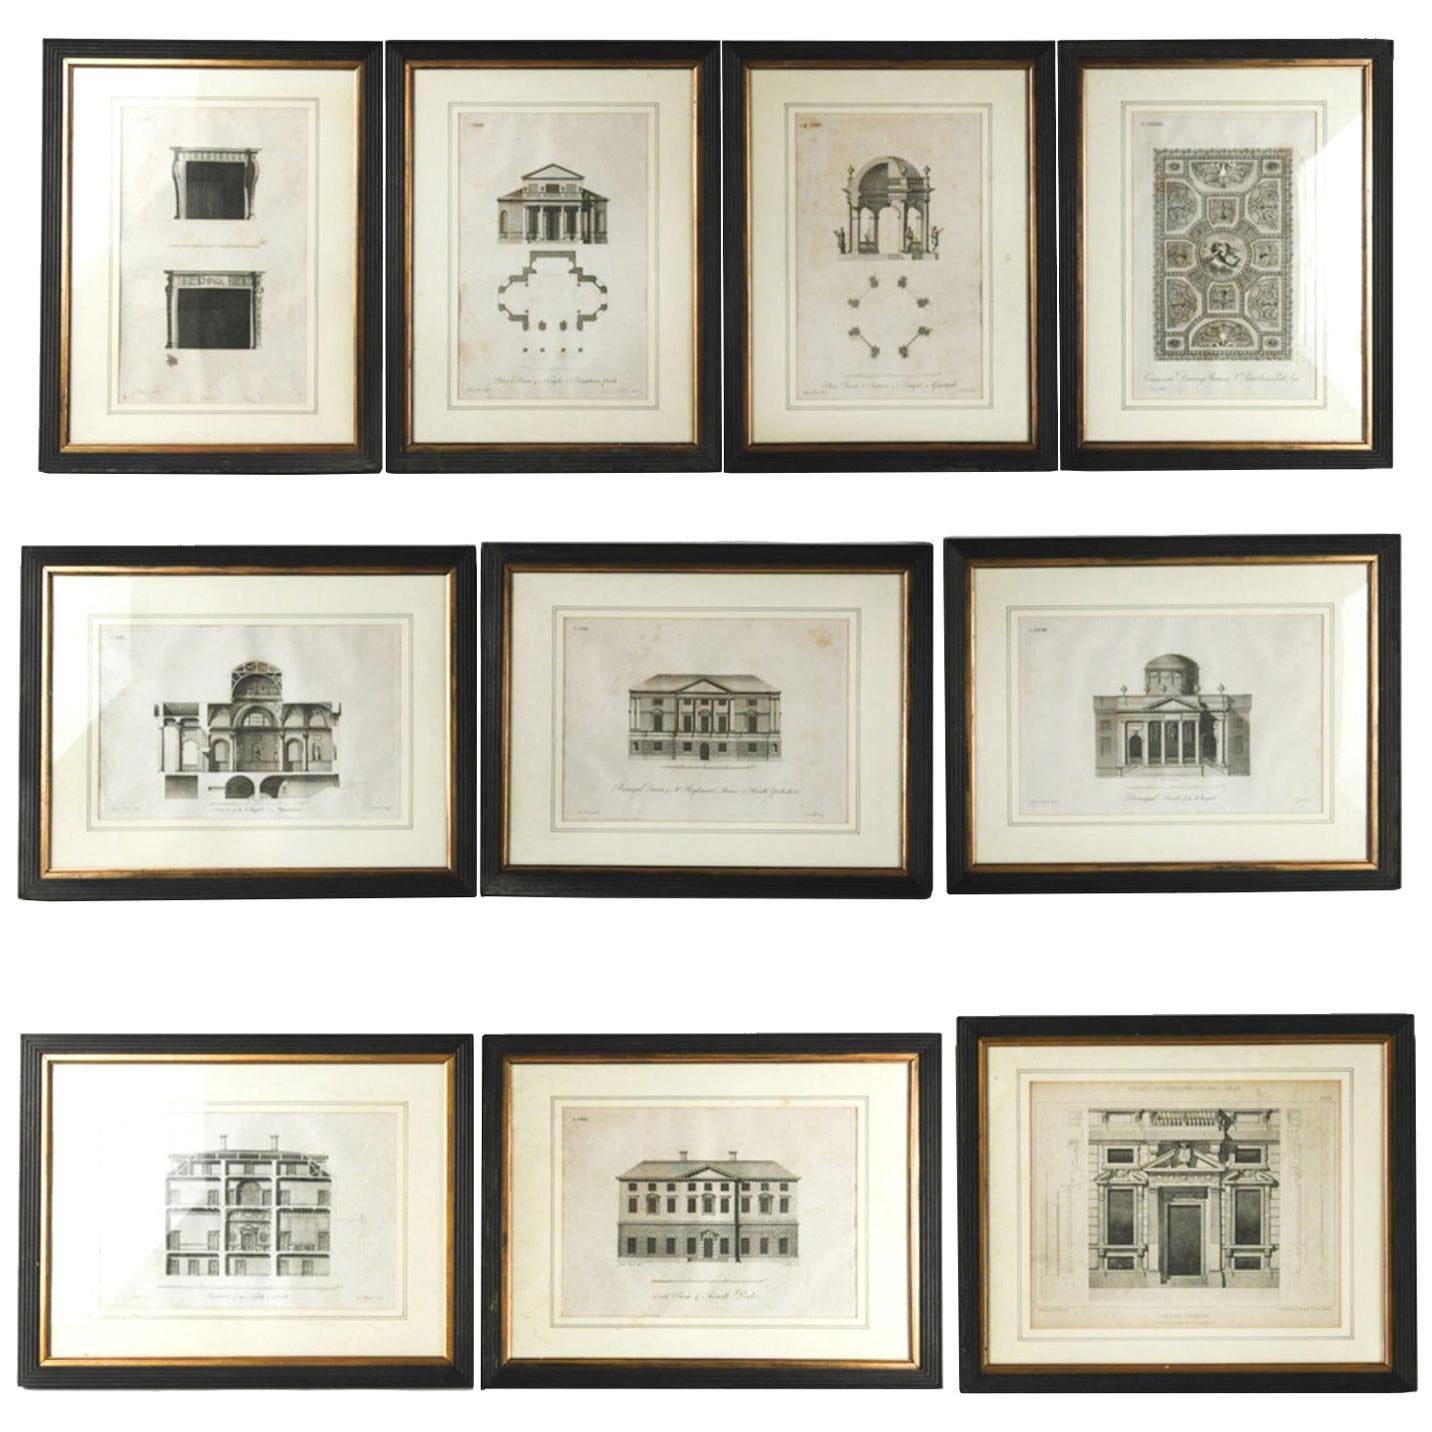 Framed Architectural Engravings, a Set of 10